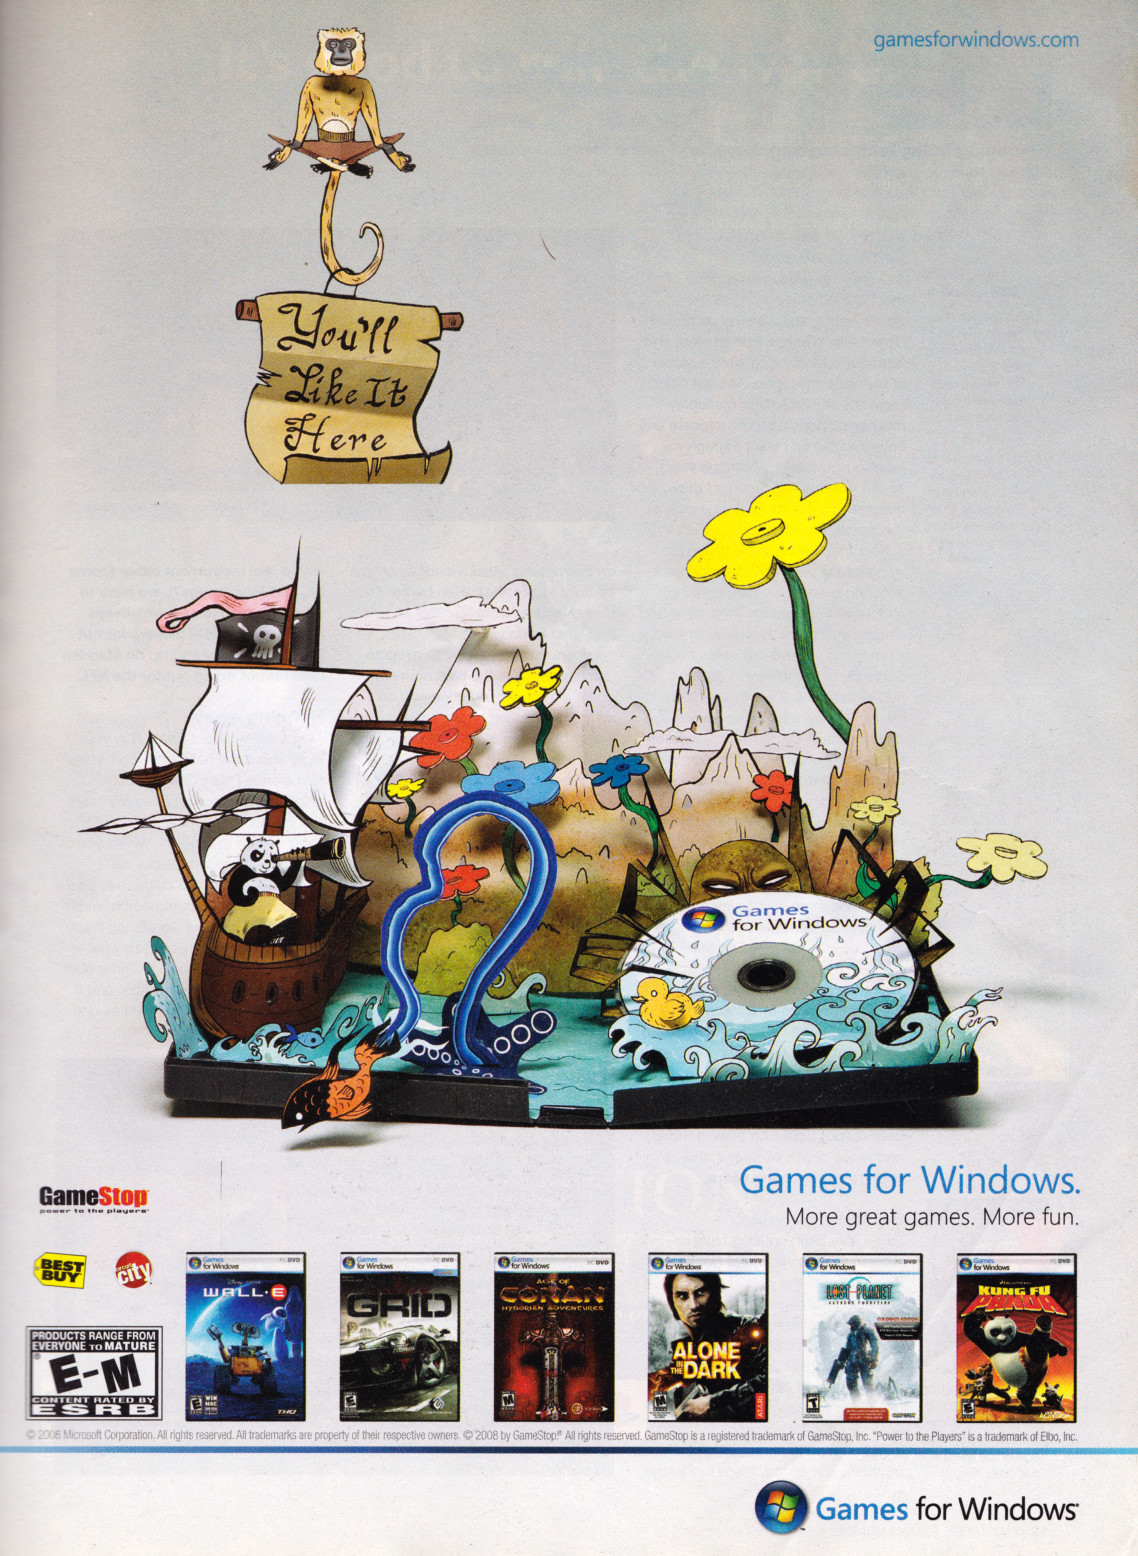 ‘Games for Windows - ‘You’ll Like it Here’’
[’Wall-E’, ‘GRiD’, ‘Age of Conan: Hyborian Adventures’ , ‘Alone in the Dark’, ‘Lost Planet: Extreme Condition’, ‘Kung-Fu Panda’][PC] [USA] [Magazine] [2008]
• EGM, July 2008 (#230)
• “You’ll Like It Here”...